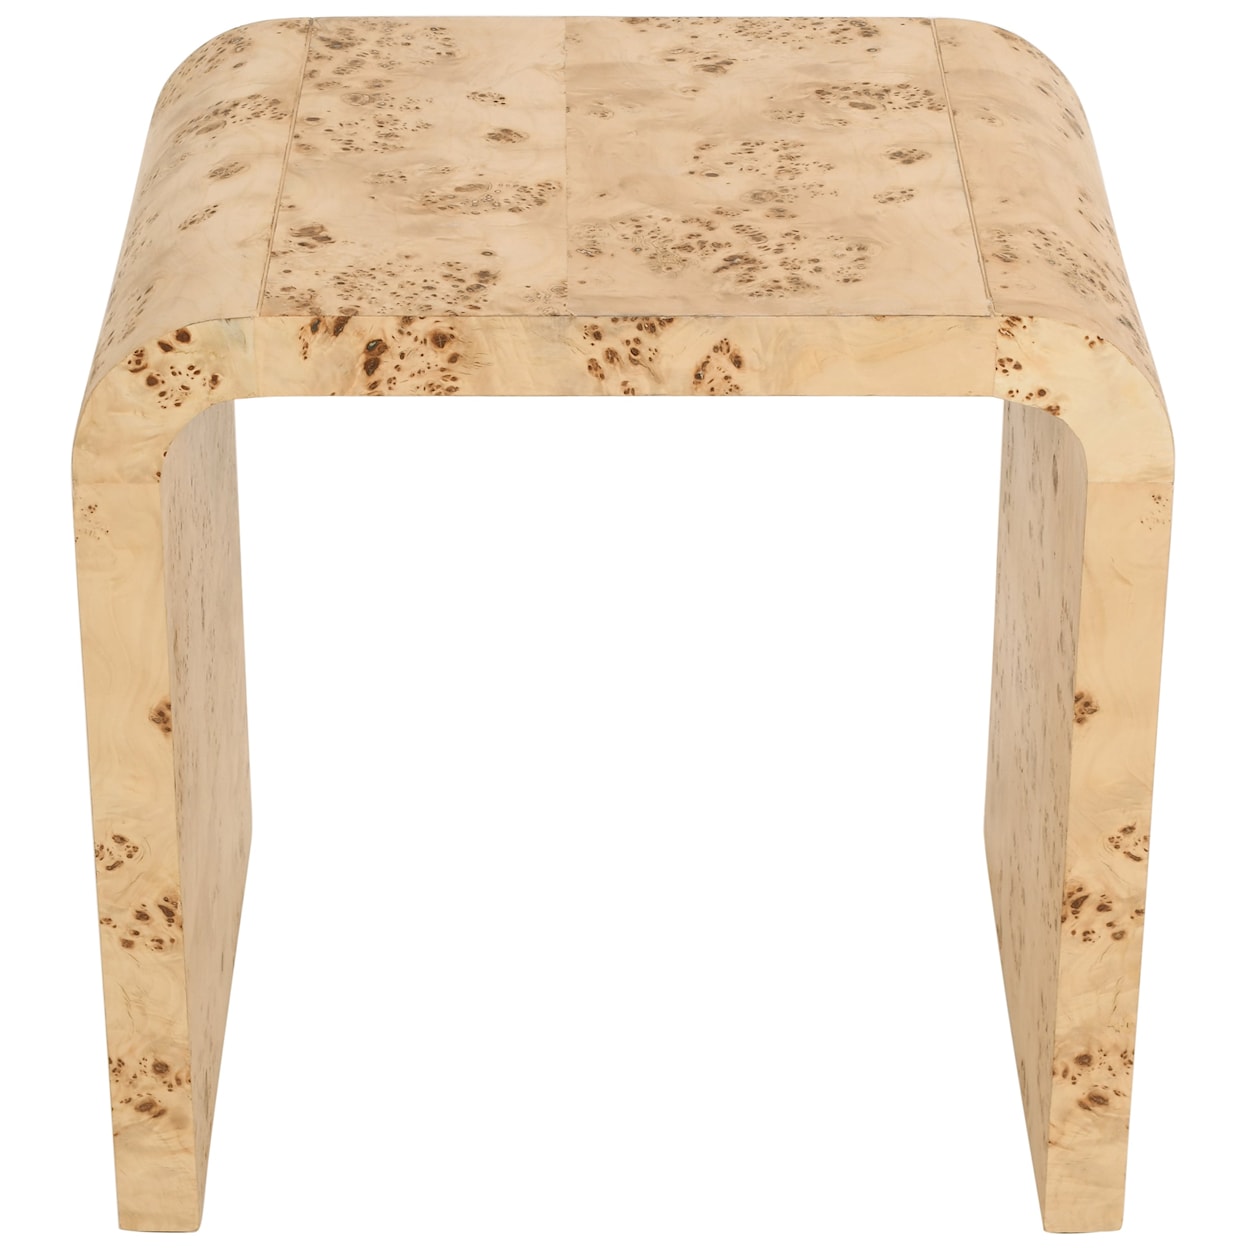 Meridian Furniture Cresthill End Table